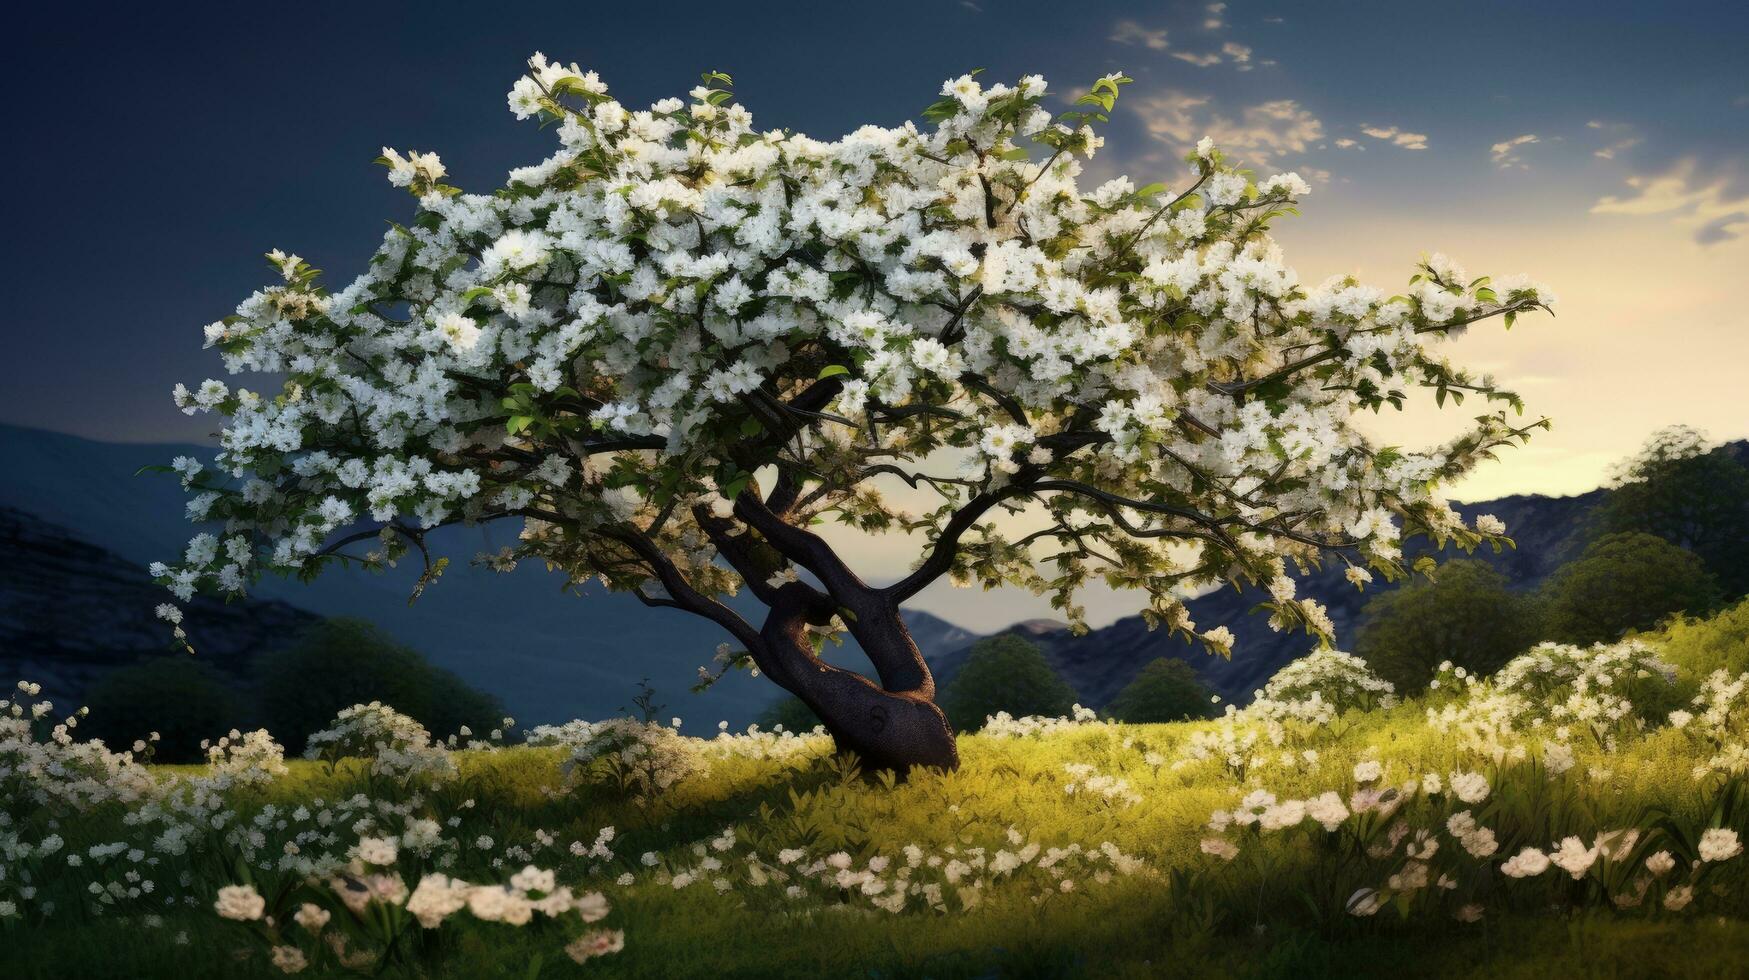 Blooming apple tree with white flowers. silhouette concept photo